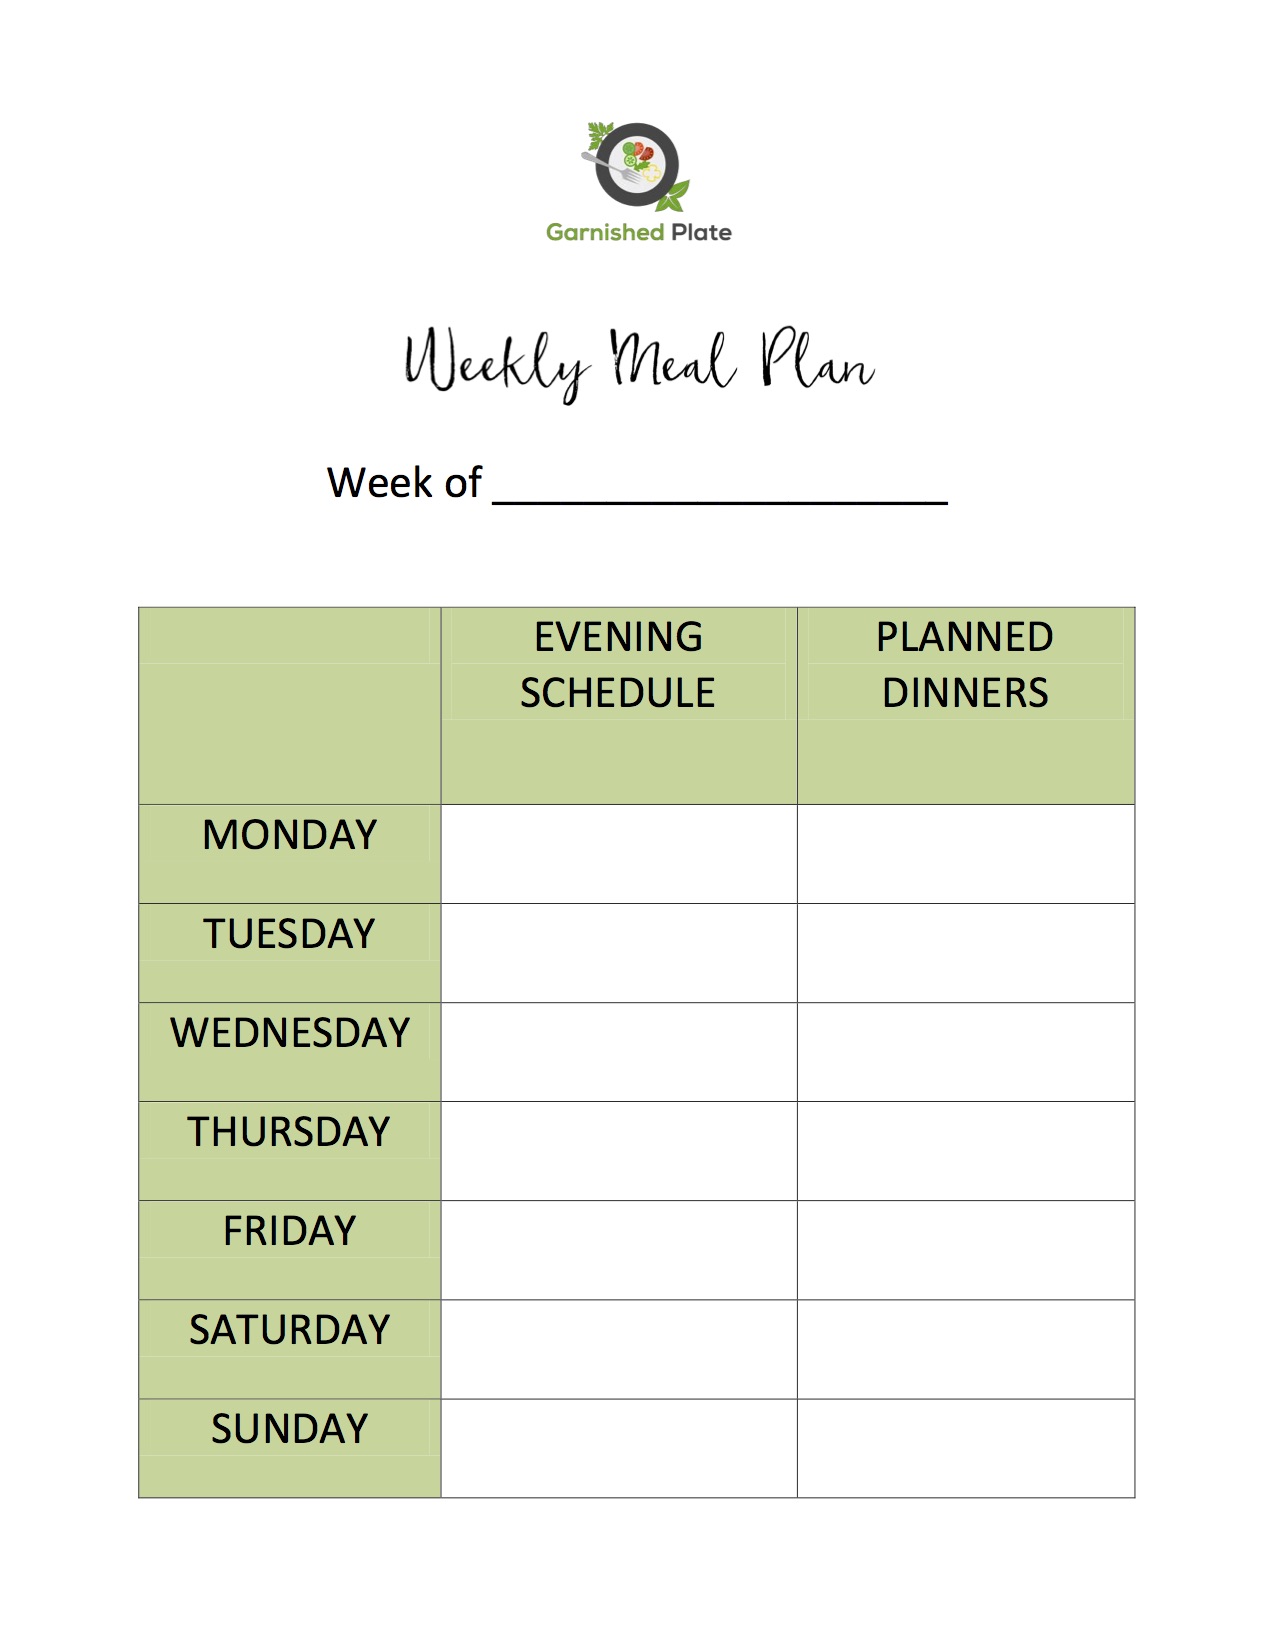 Structured Weekly Meal Plan